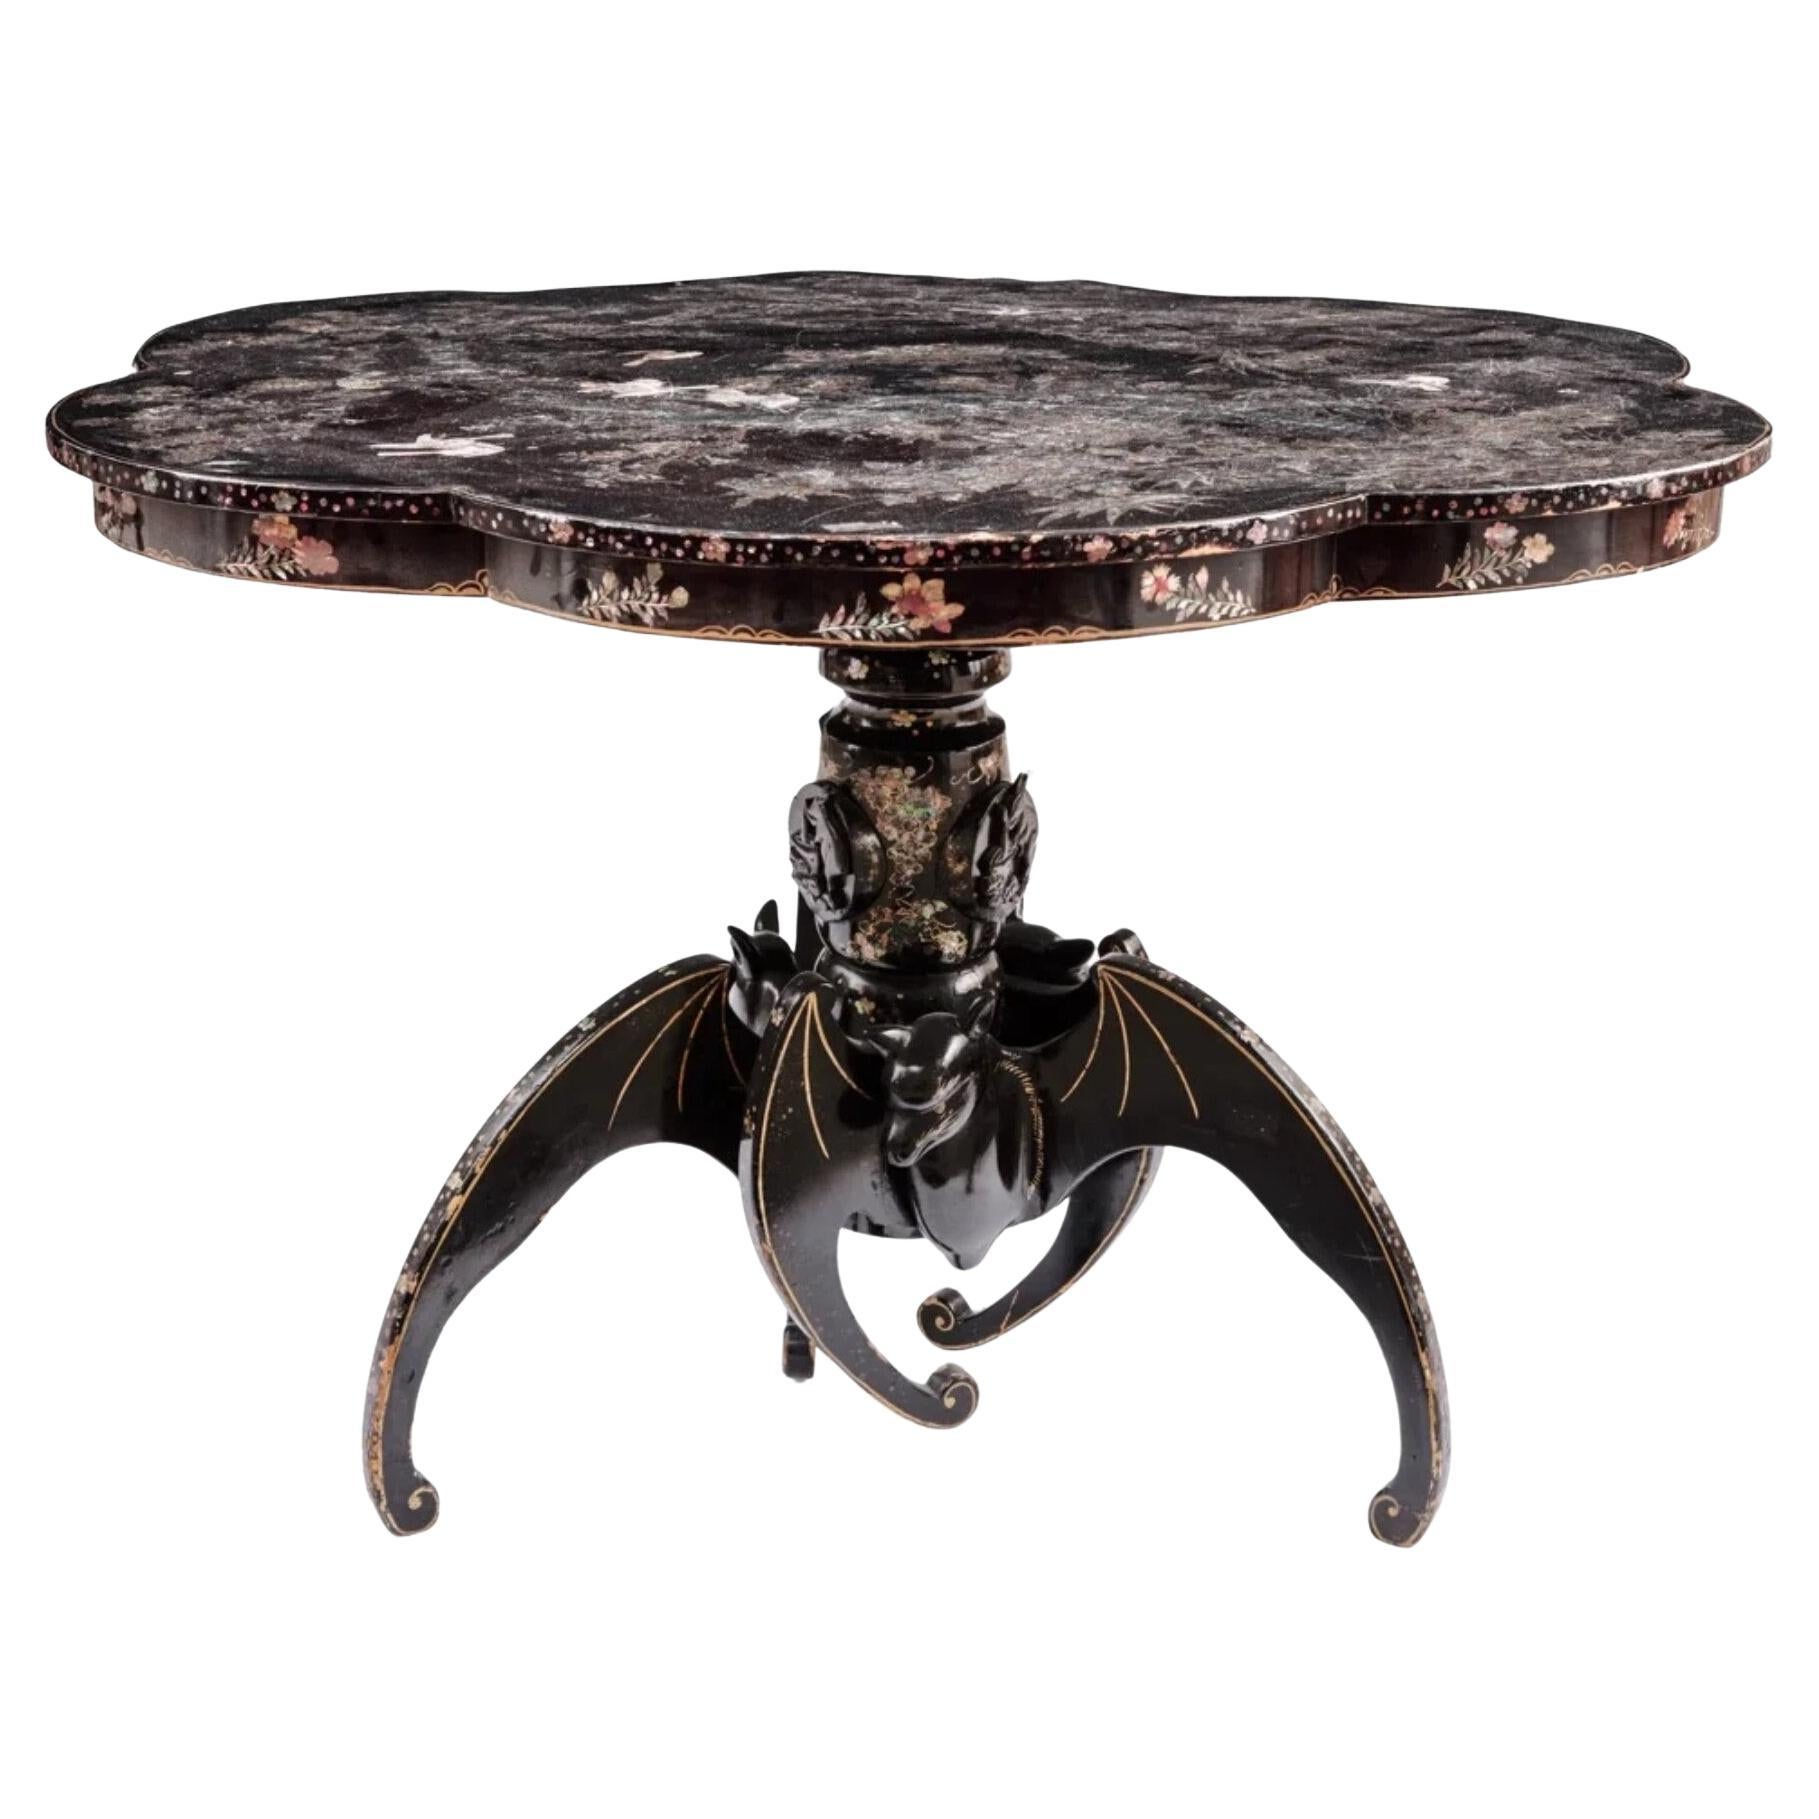 Mother-of-Pearl Black Lacquer Japanese Export Table with Feet Shaped as Bats For Sale